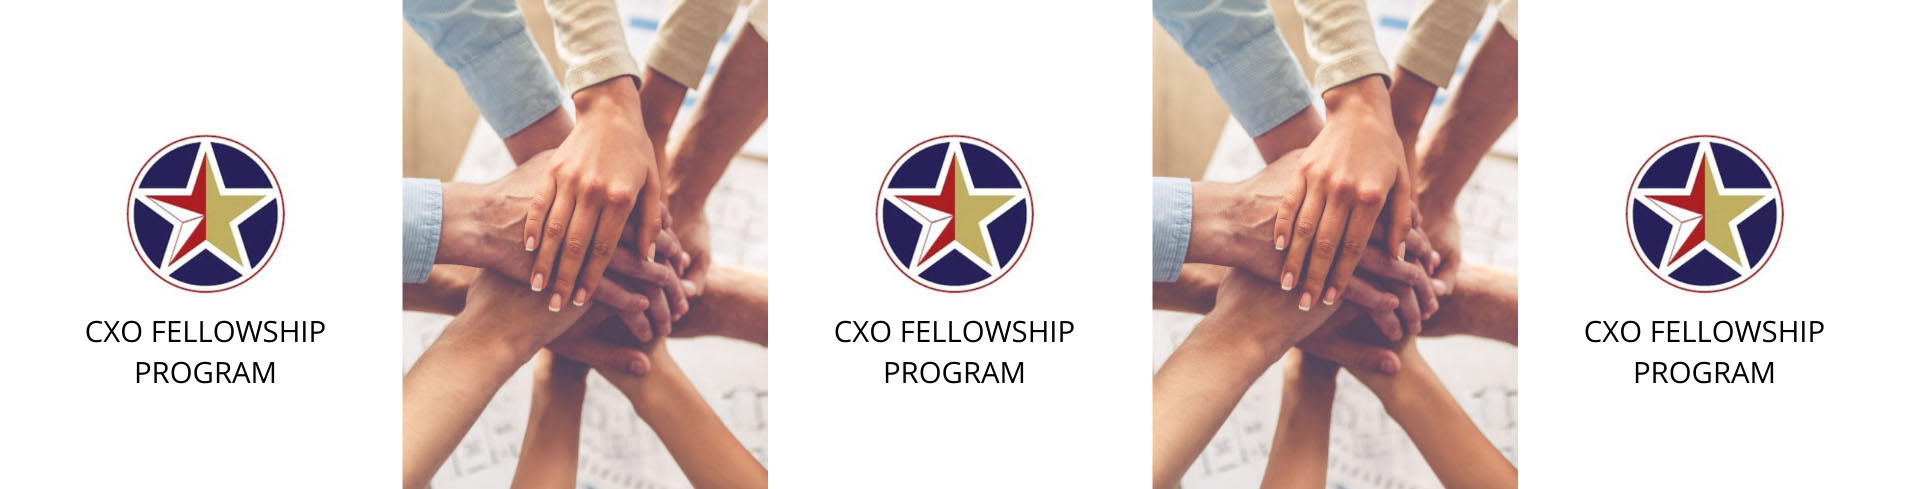 3 Reasons Why YOU Should Apply to the CXO Fellowship Program.